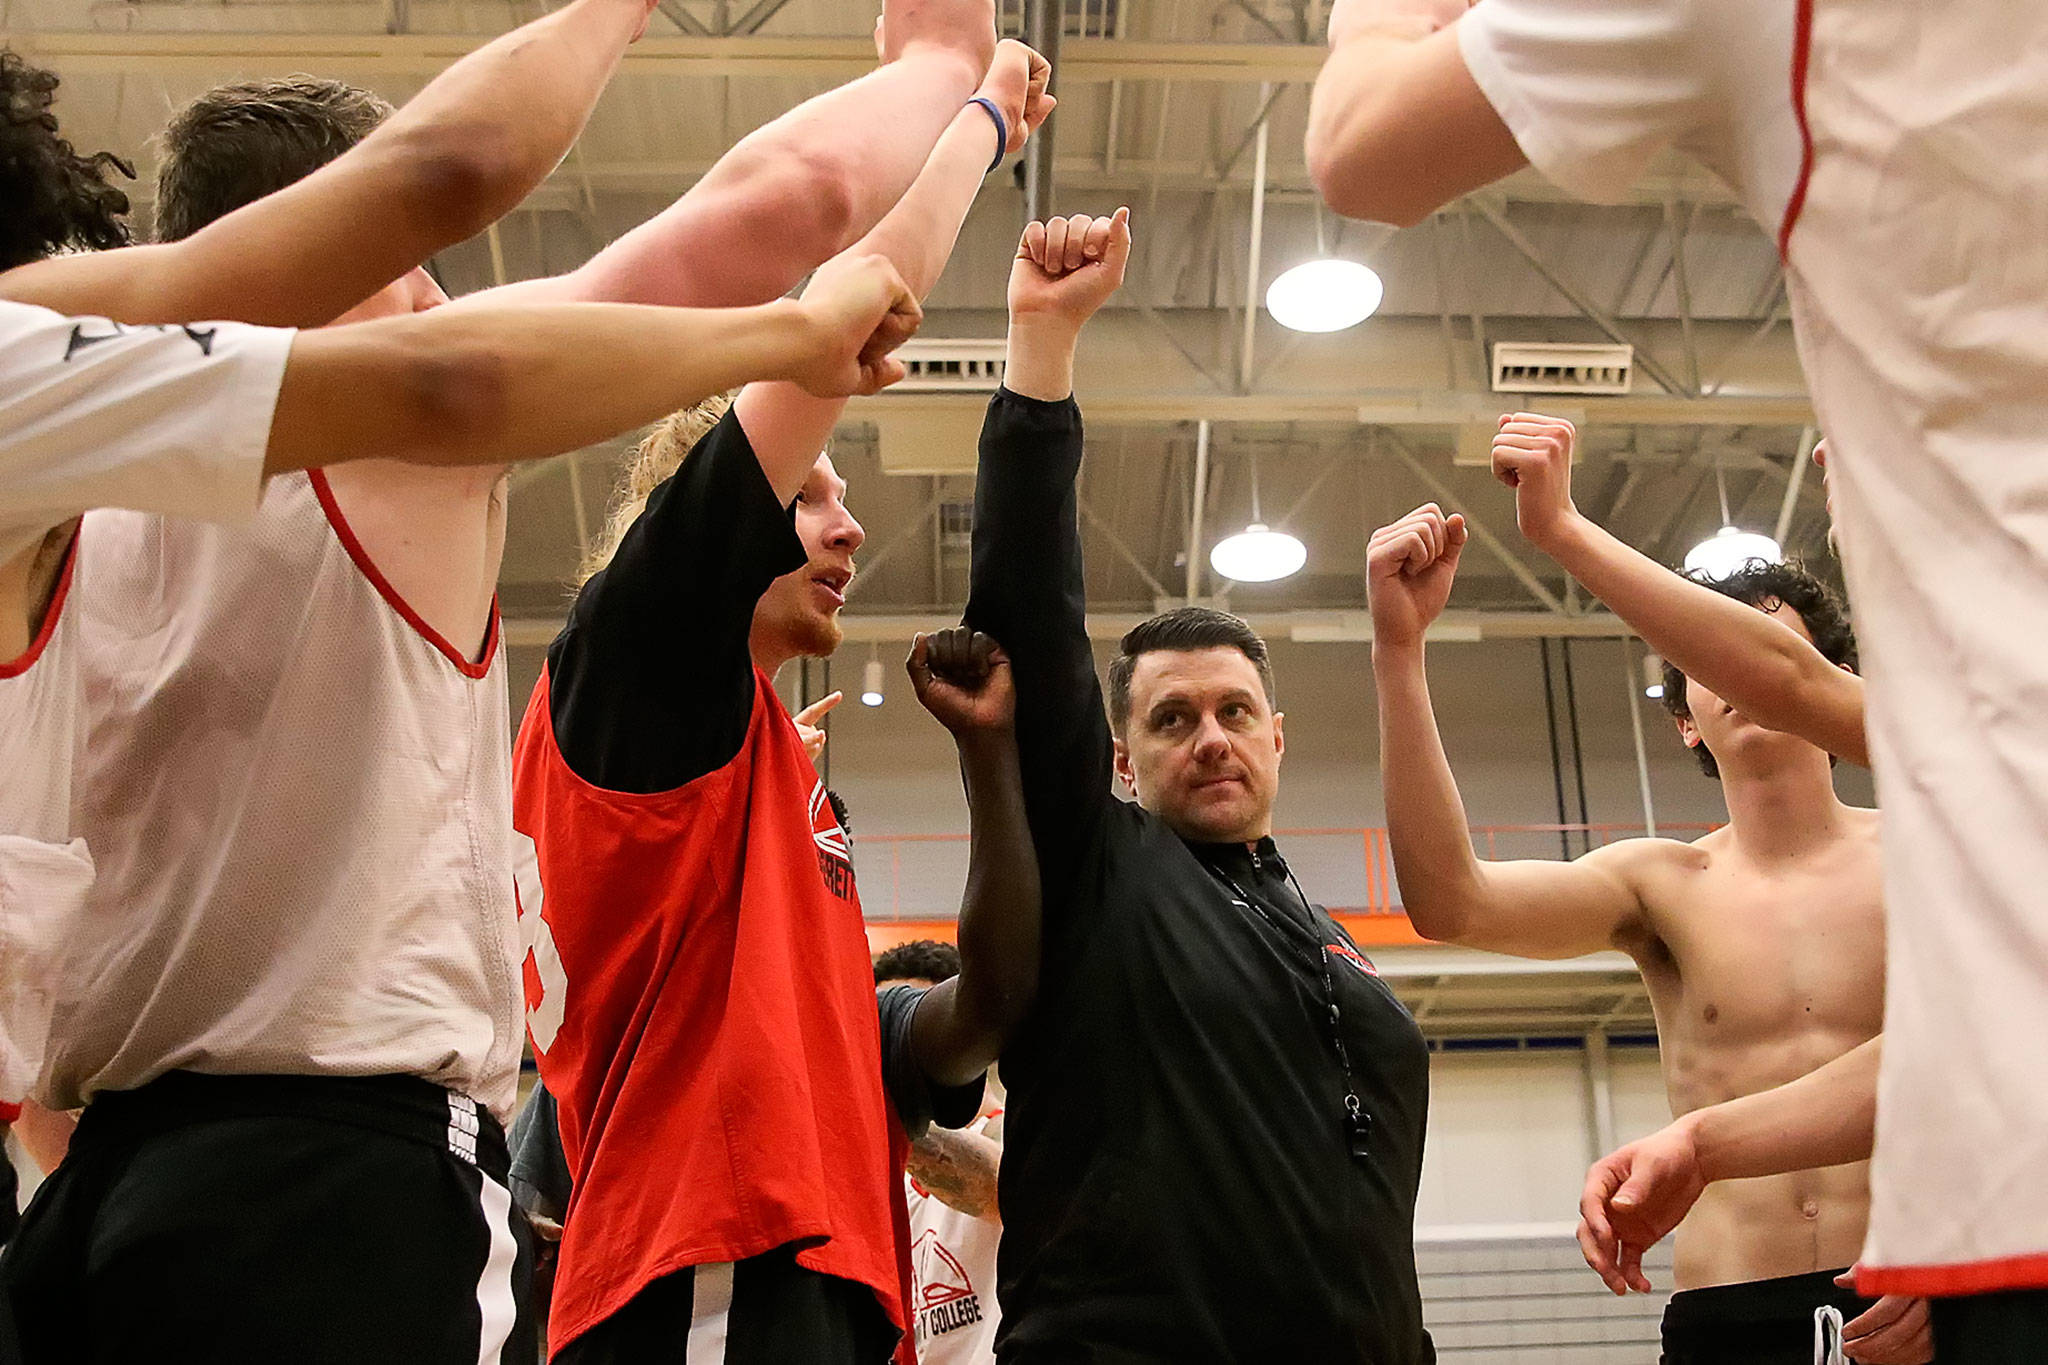 Everett Community College men’s basketball coach Mike Trautman gathers his team at the end of practice on March 2 in Everett. (Kevin Clark / The Herald)